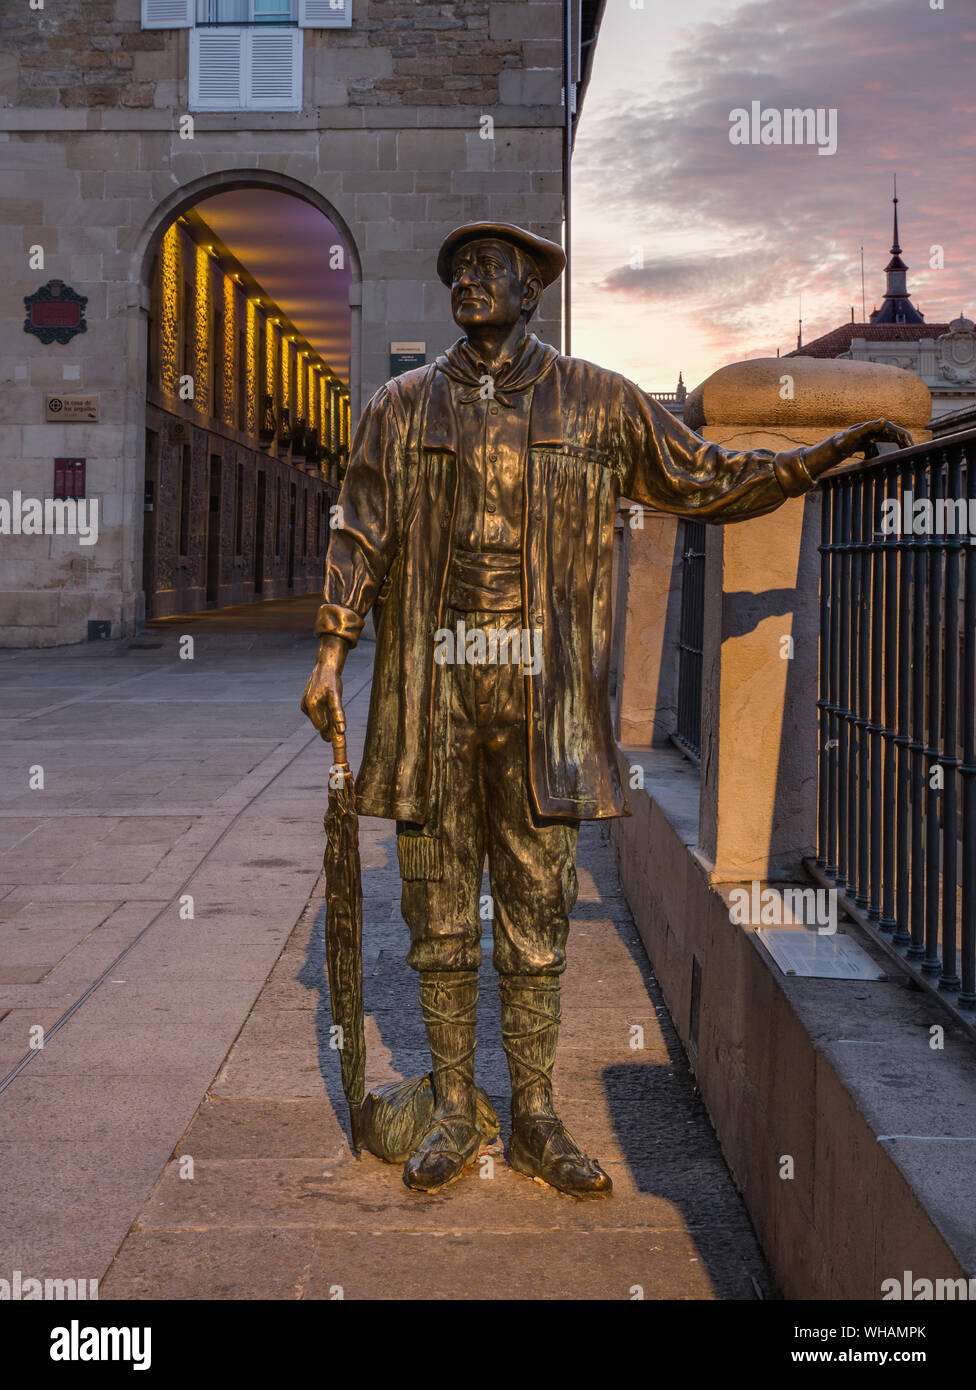 Statue of Celedon, traditional character of the city festival, in front of the colorful lighted Los Arquillos passageway Stock Photo